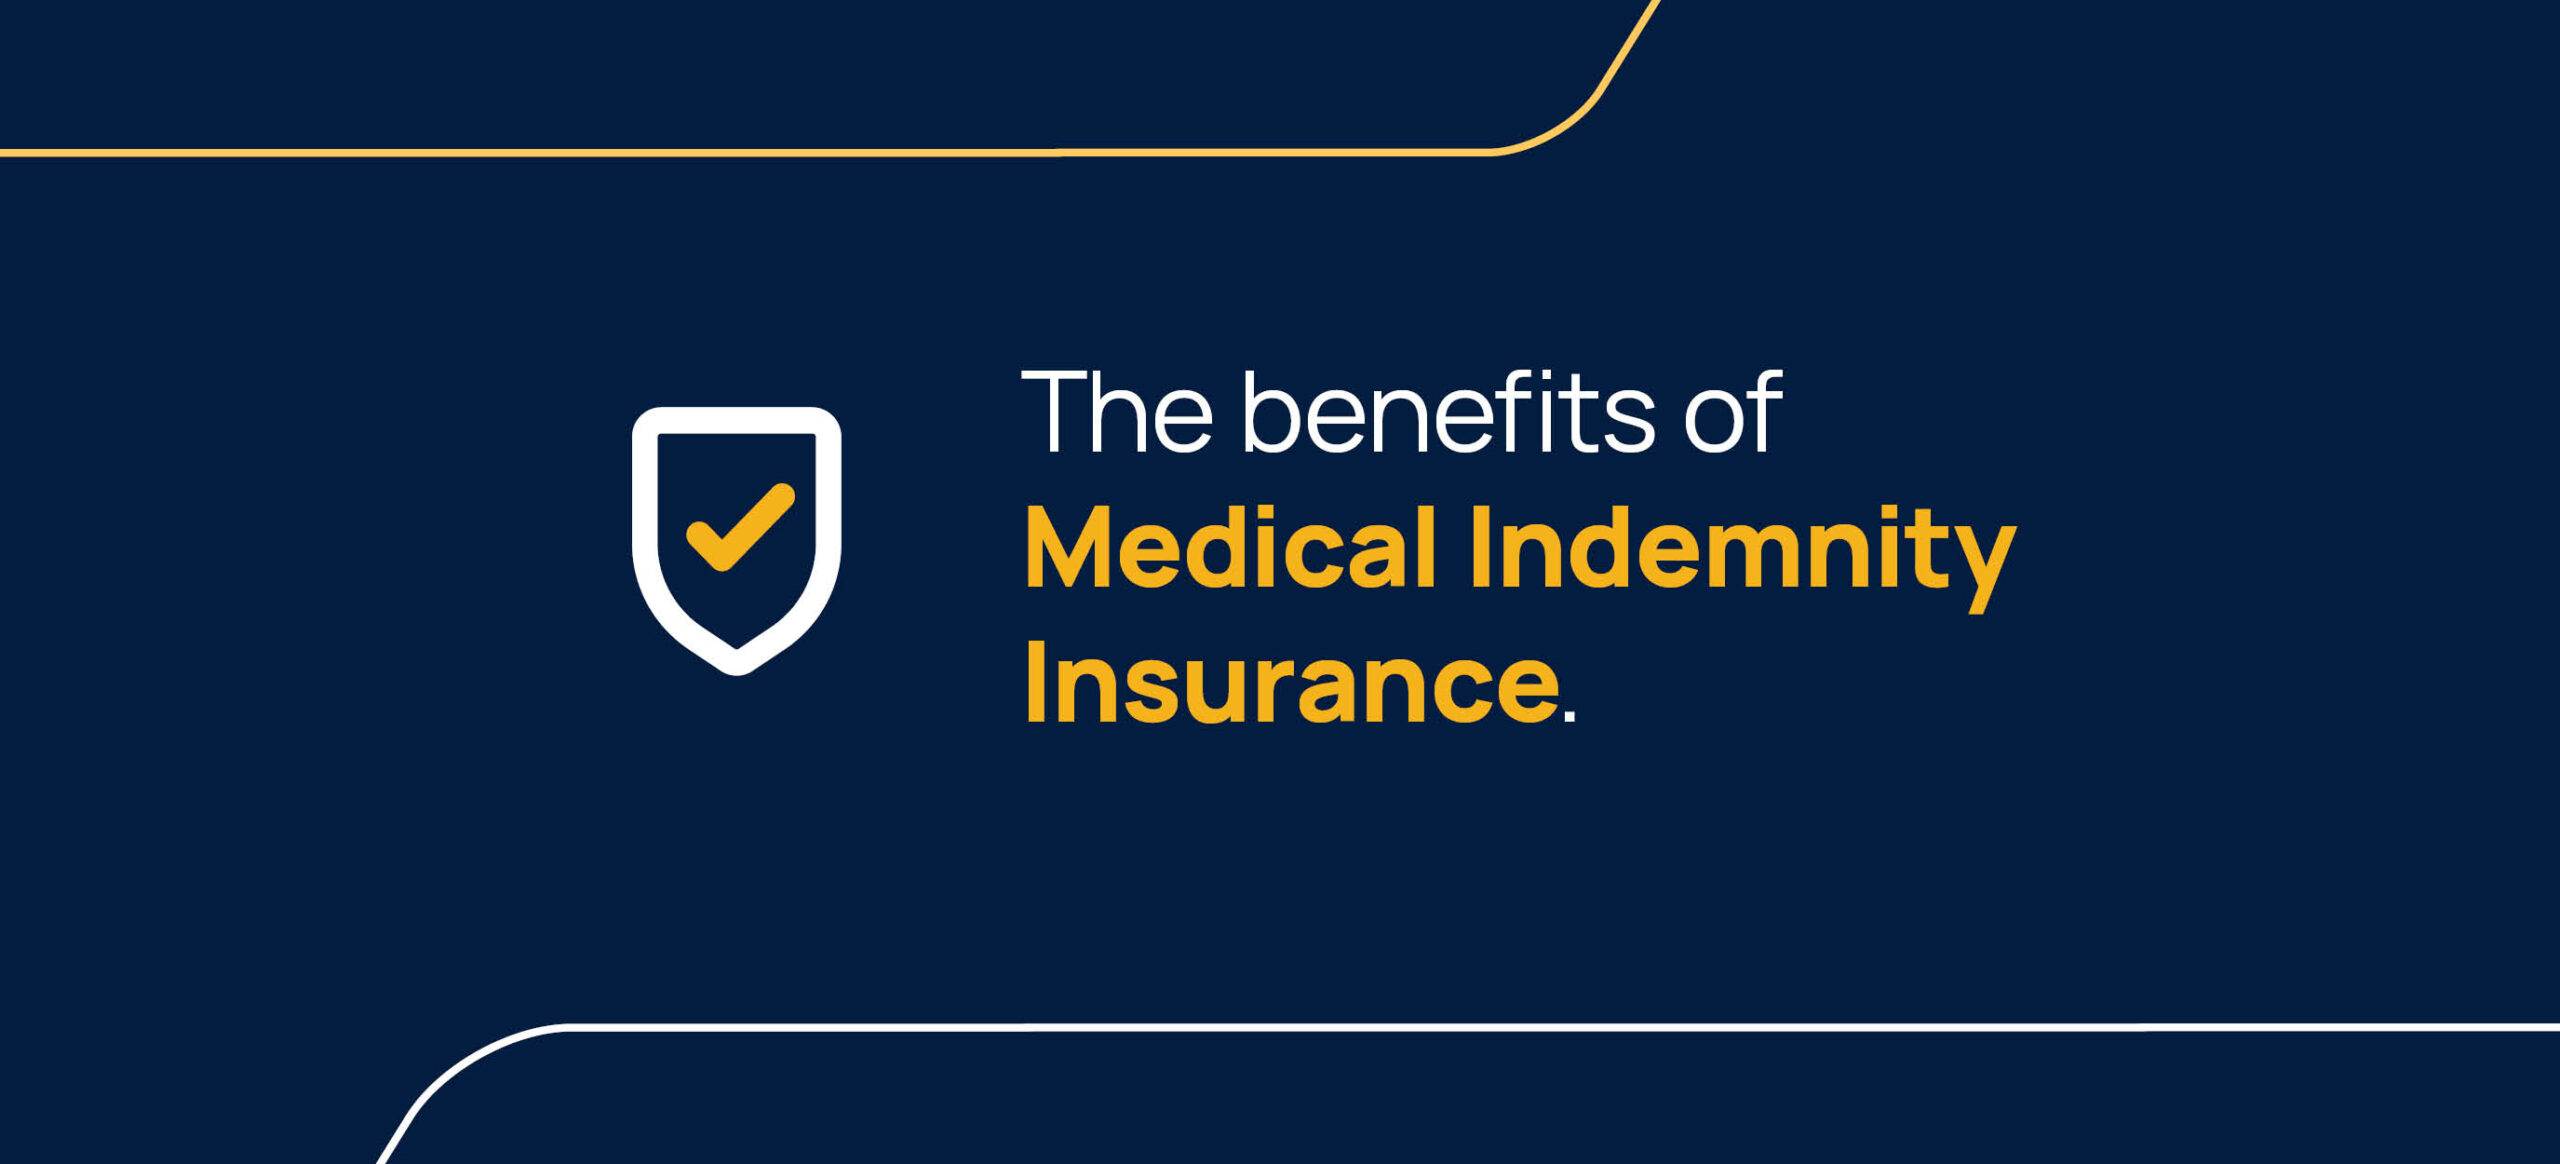 Medical indemnity insurance: What it is, the benefits and what it covers.